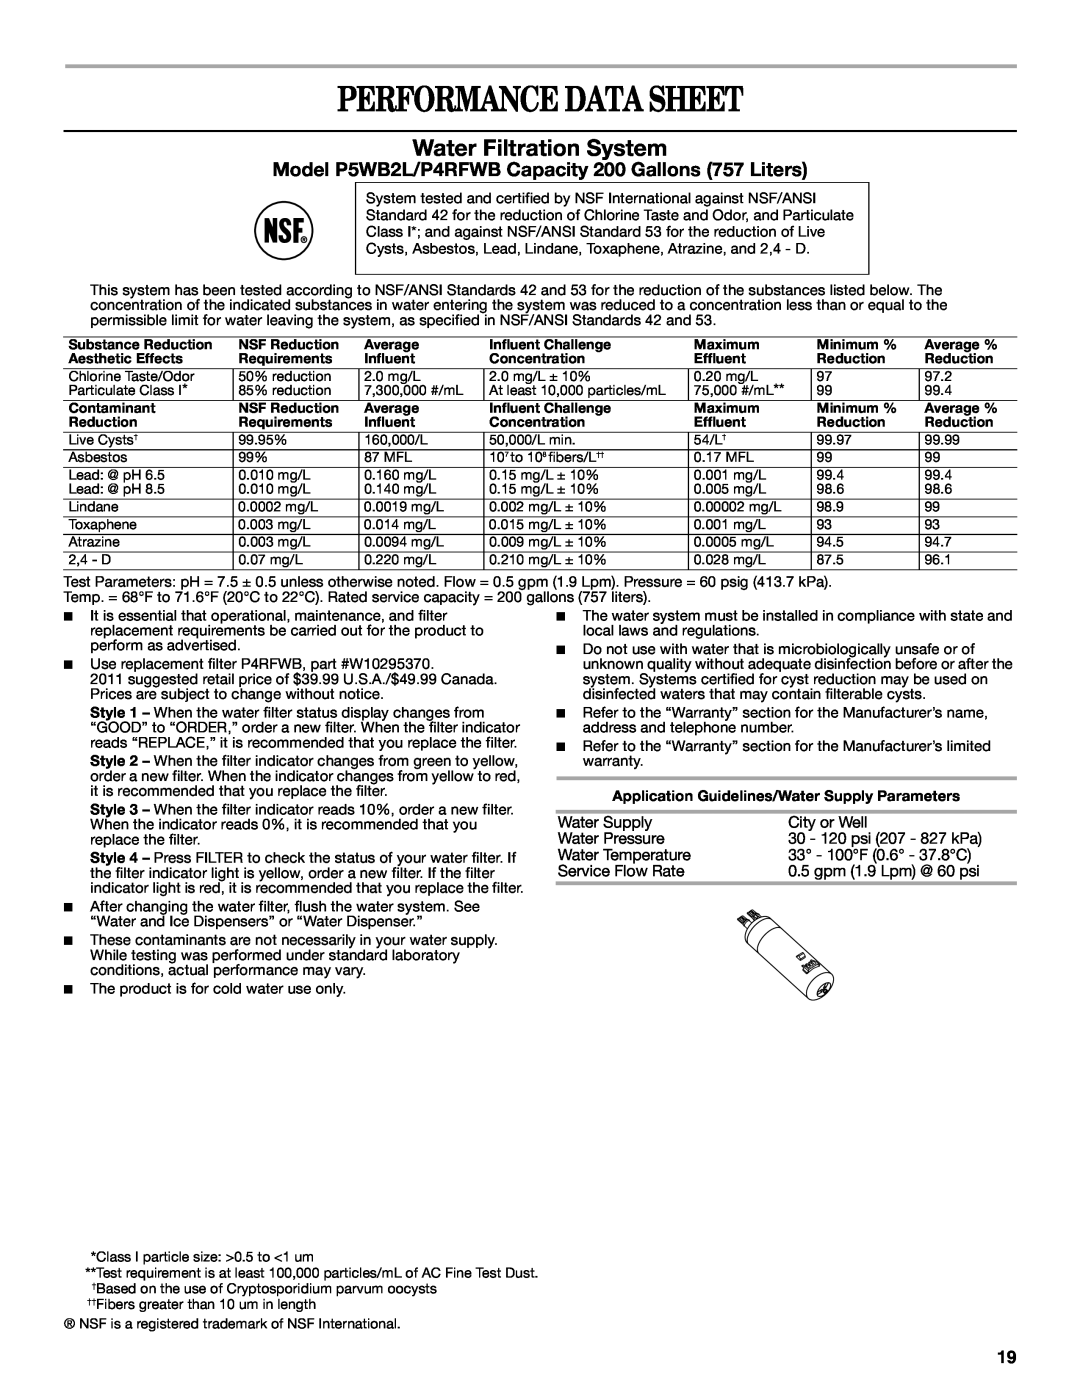 Whirlpool GSF26C4EXT Performance Data Sheet, Water Filtration System, Model P5WB2L/P4RFWB Capacity 200 Gallons 757 Liters 